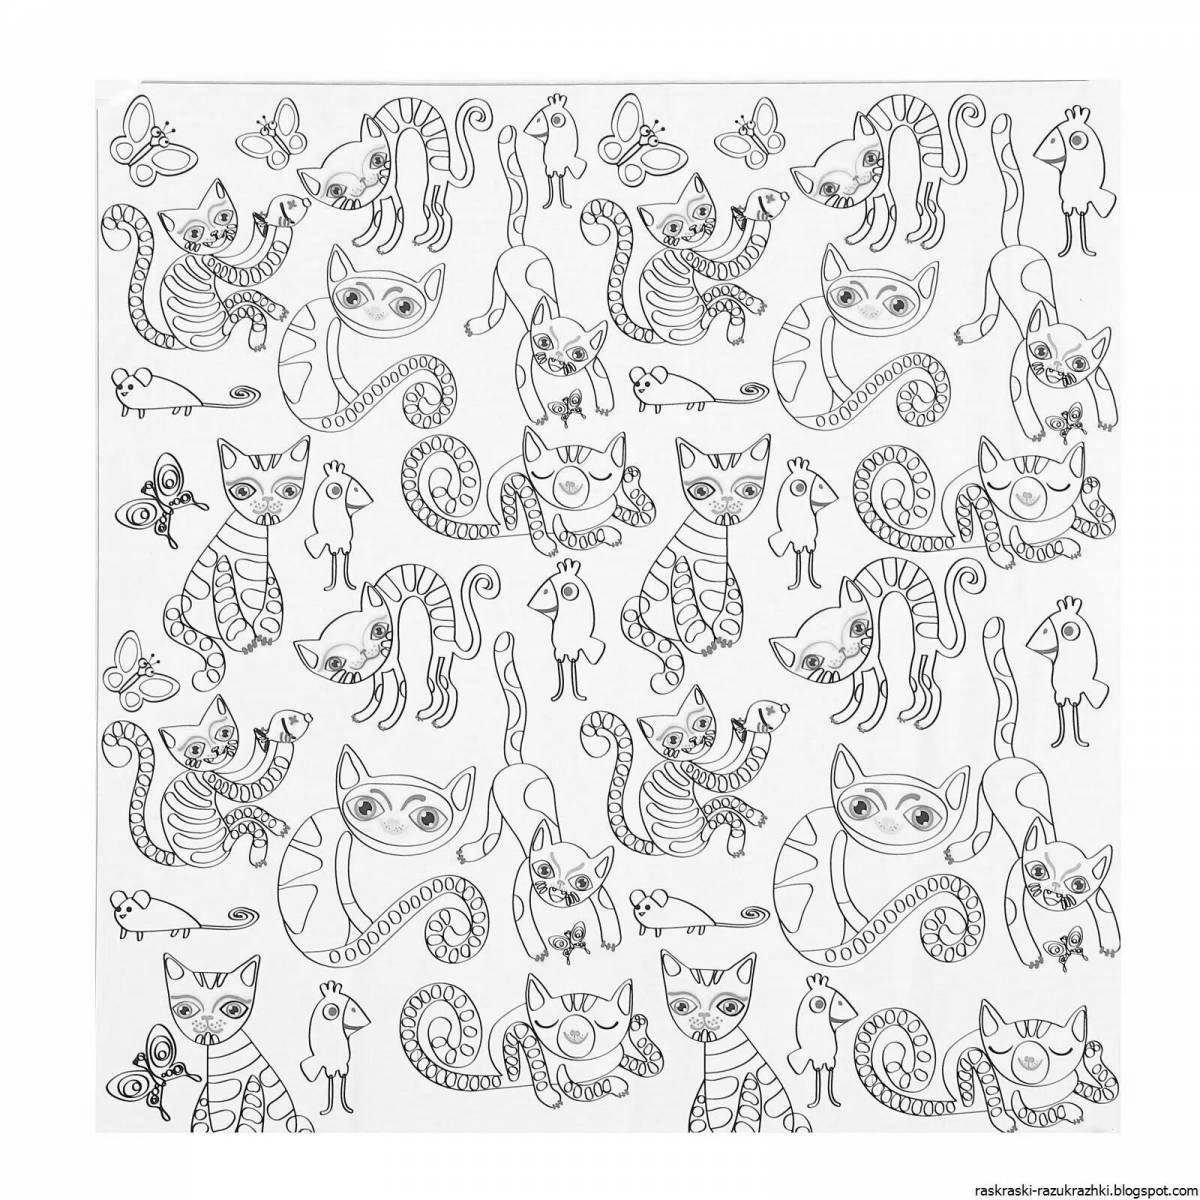 Witty cat sticker coloring page